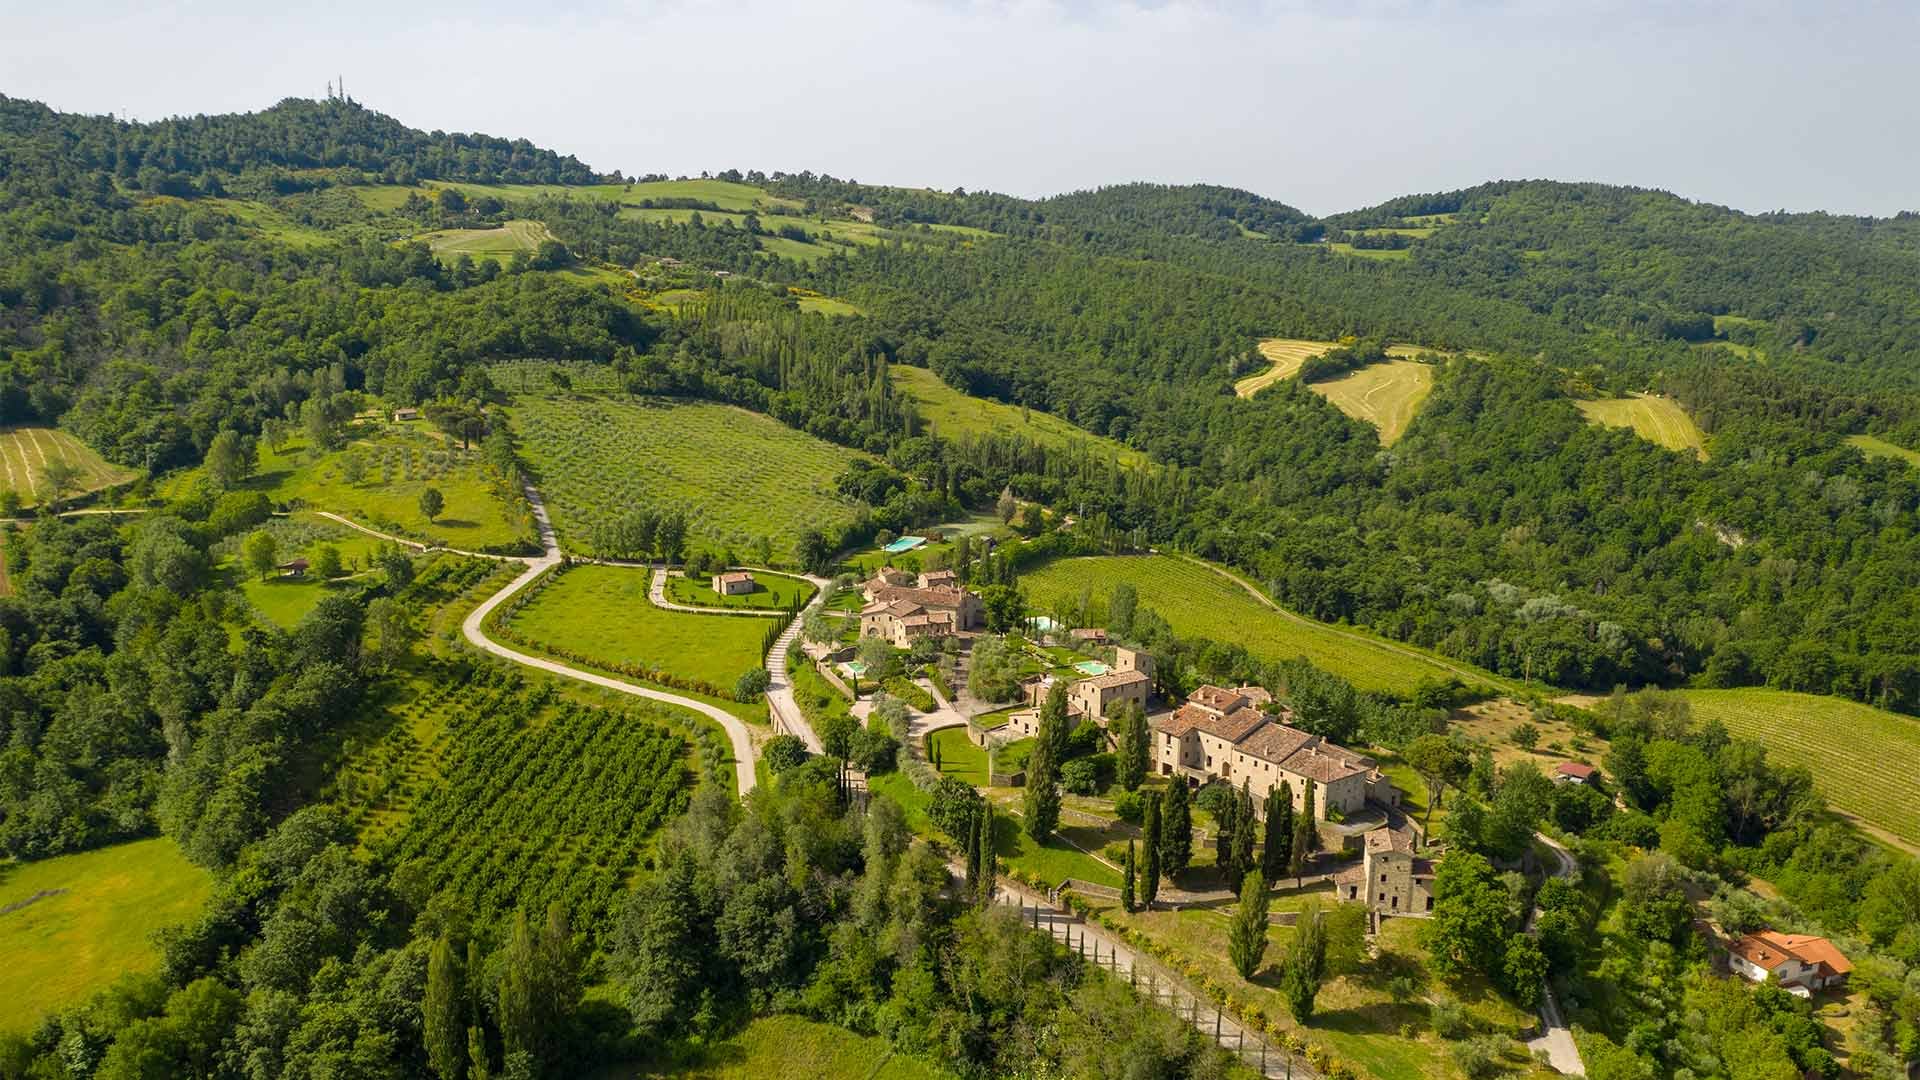 Francis York Ancient Hamlet For Sale Near the Border of Tuscany and Umbria 22.jpg